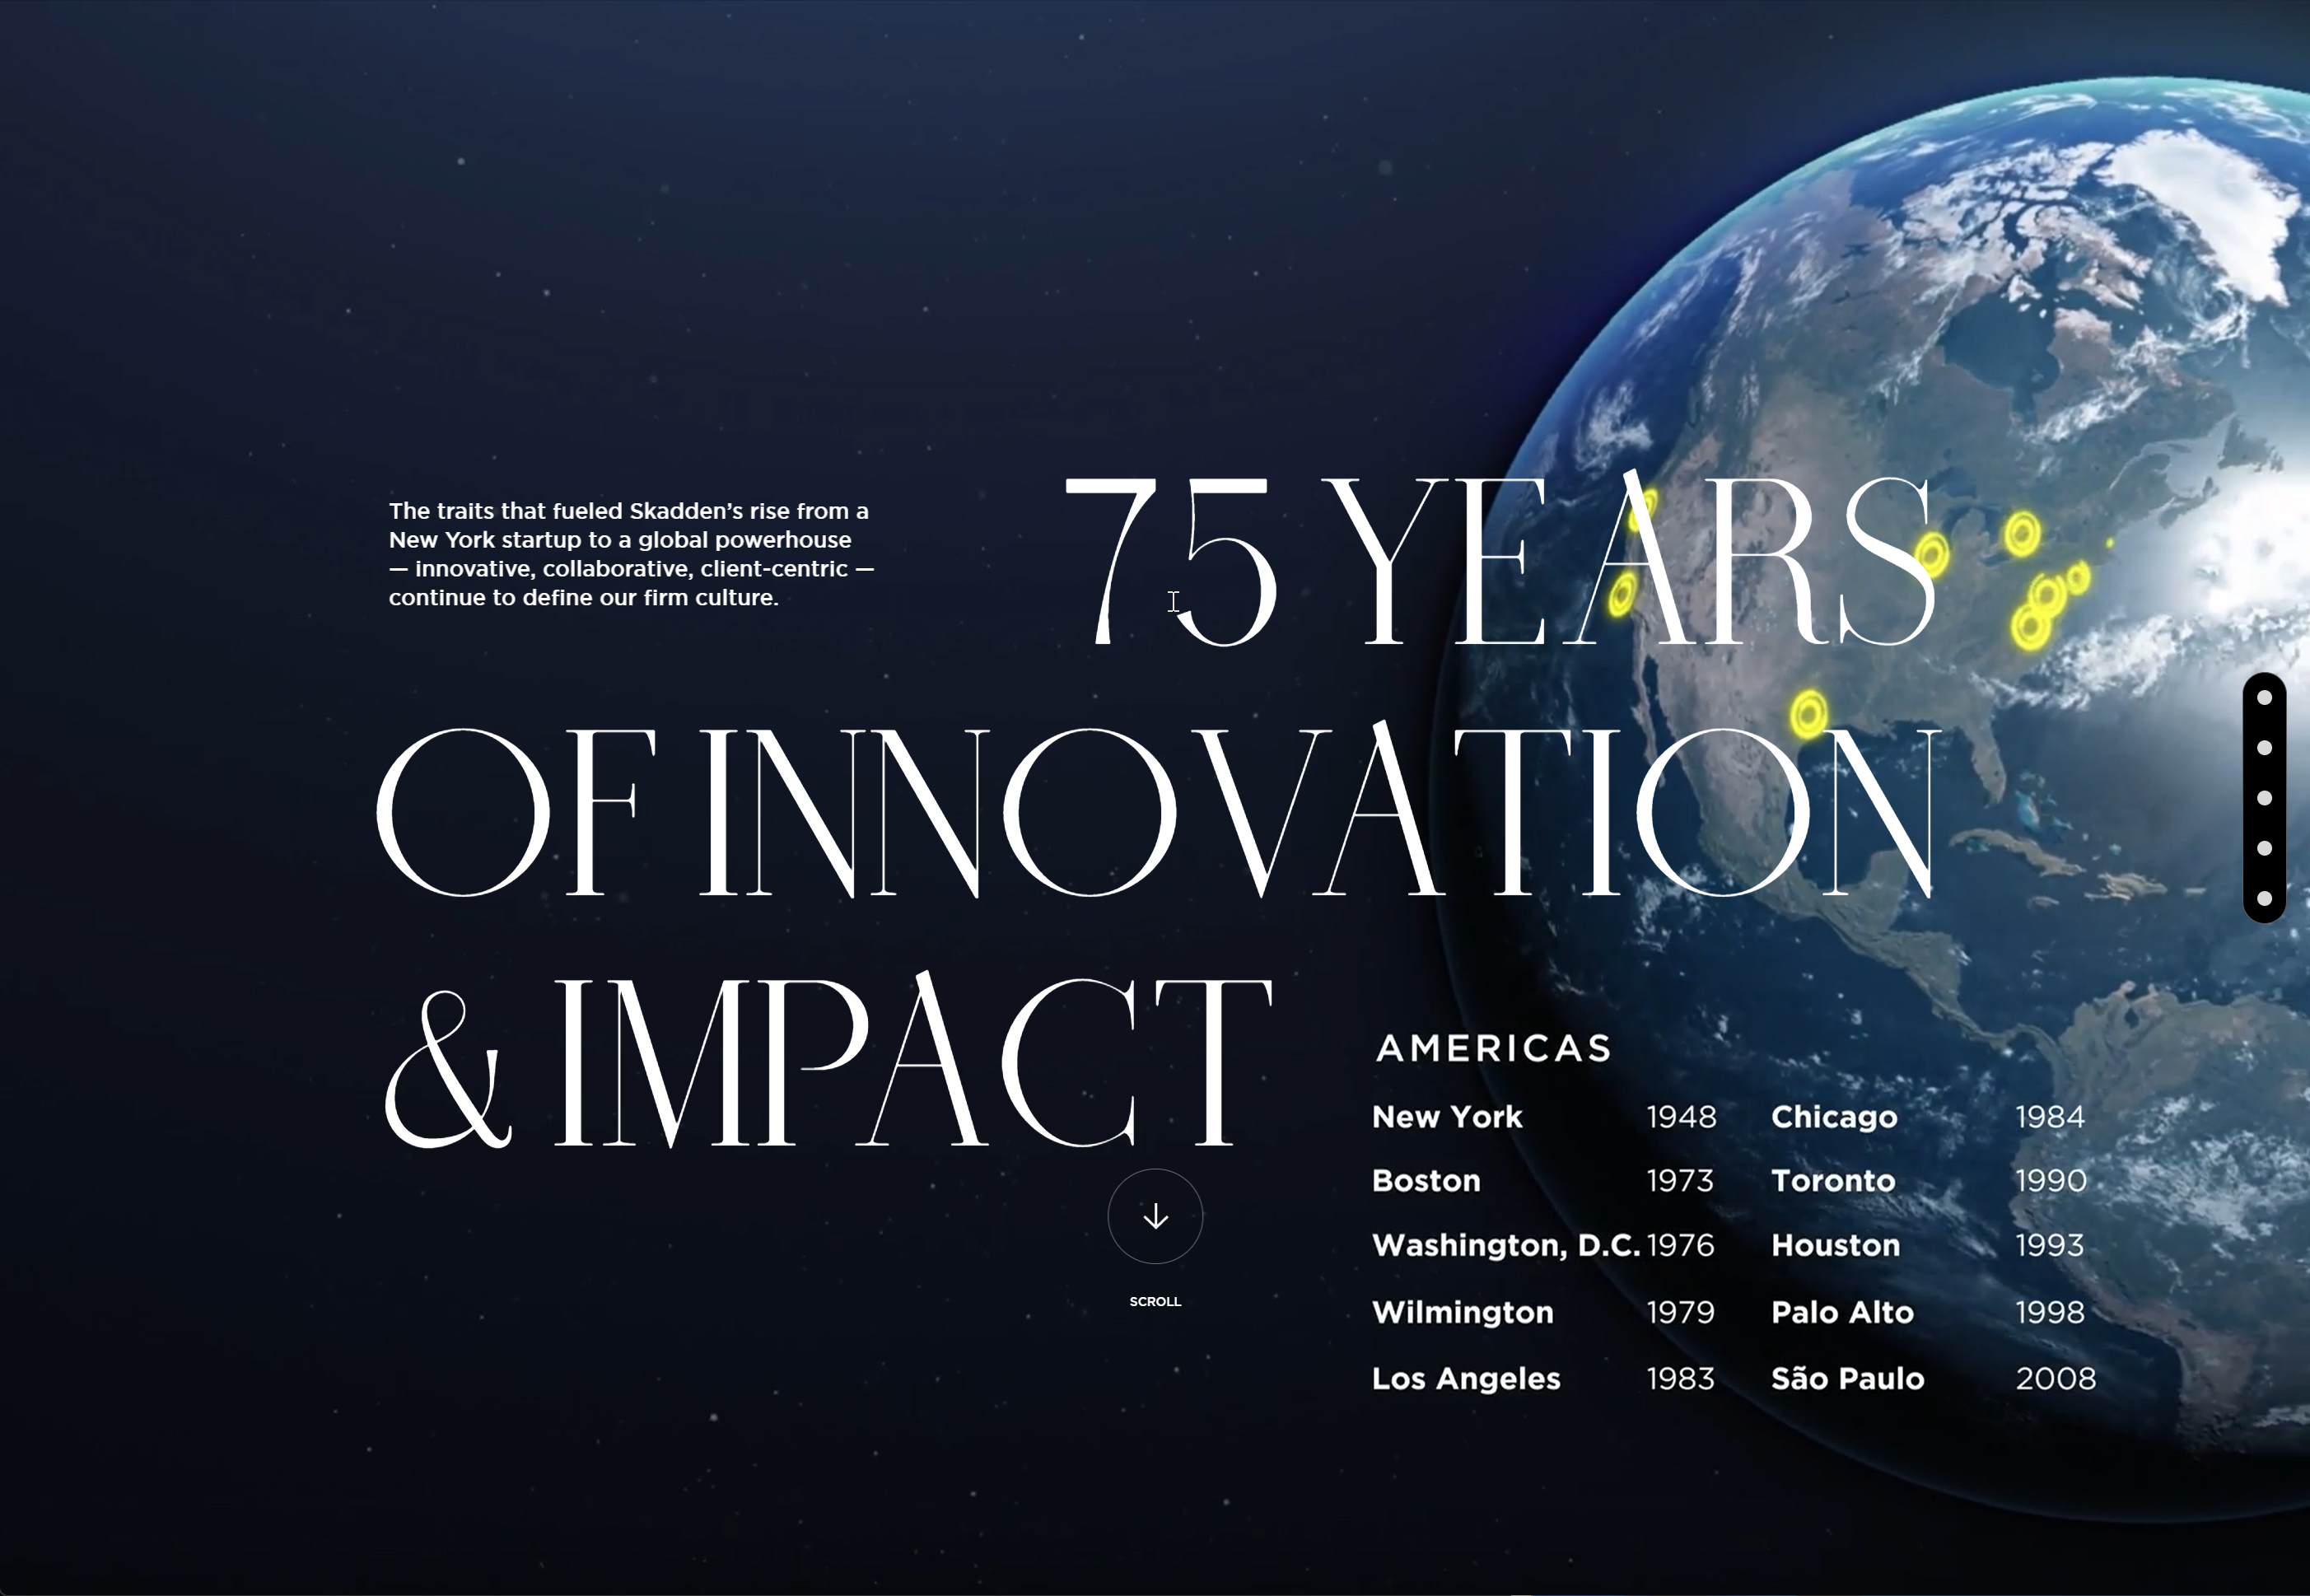 75 Years of Innovation & Impact